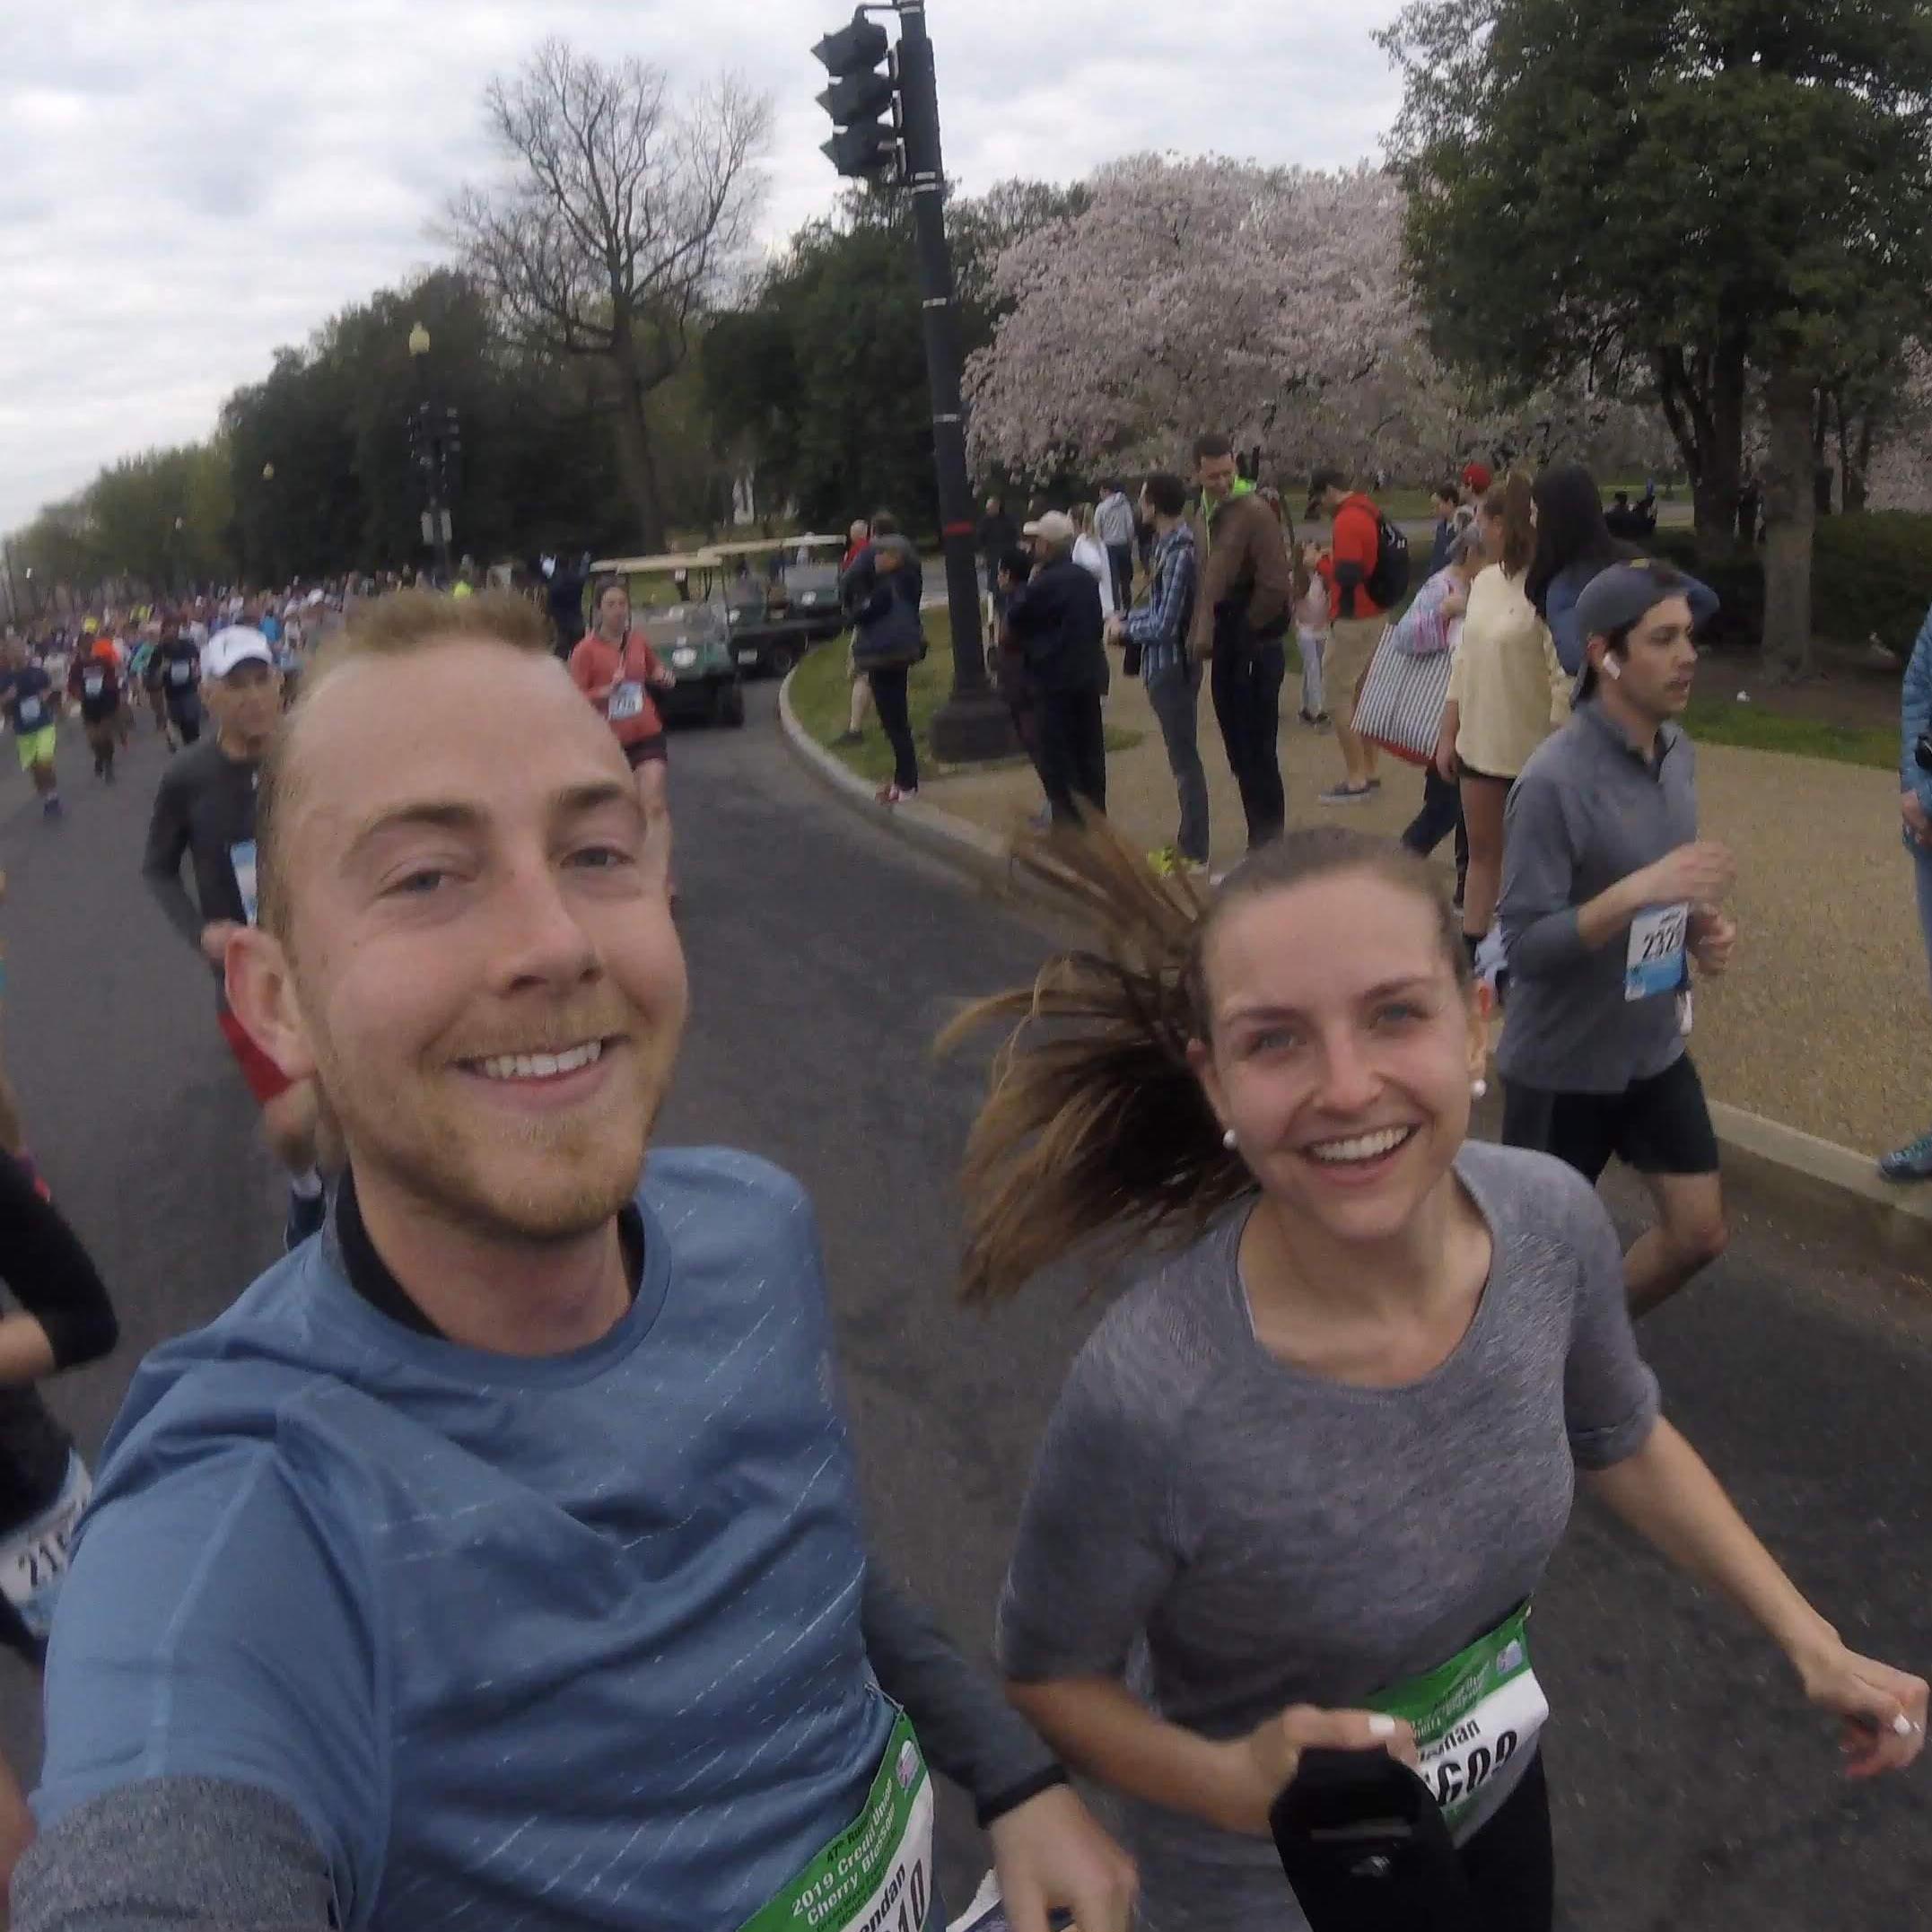 Our second Cherry Blossom road race together!